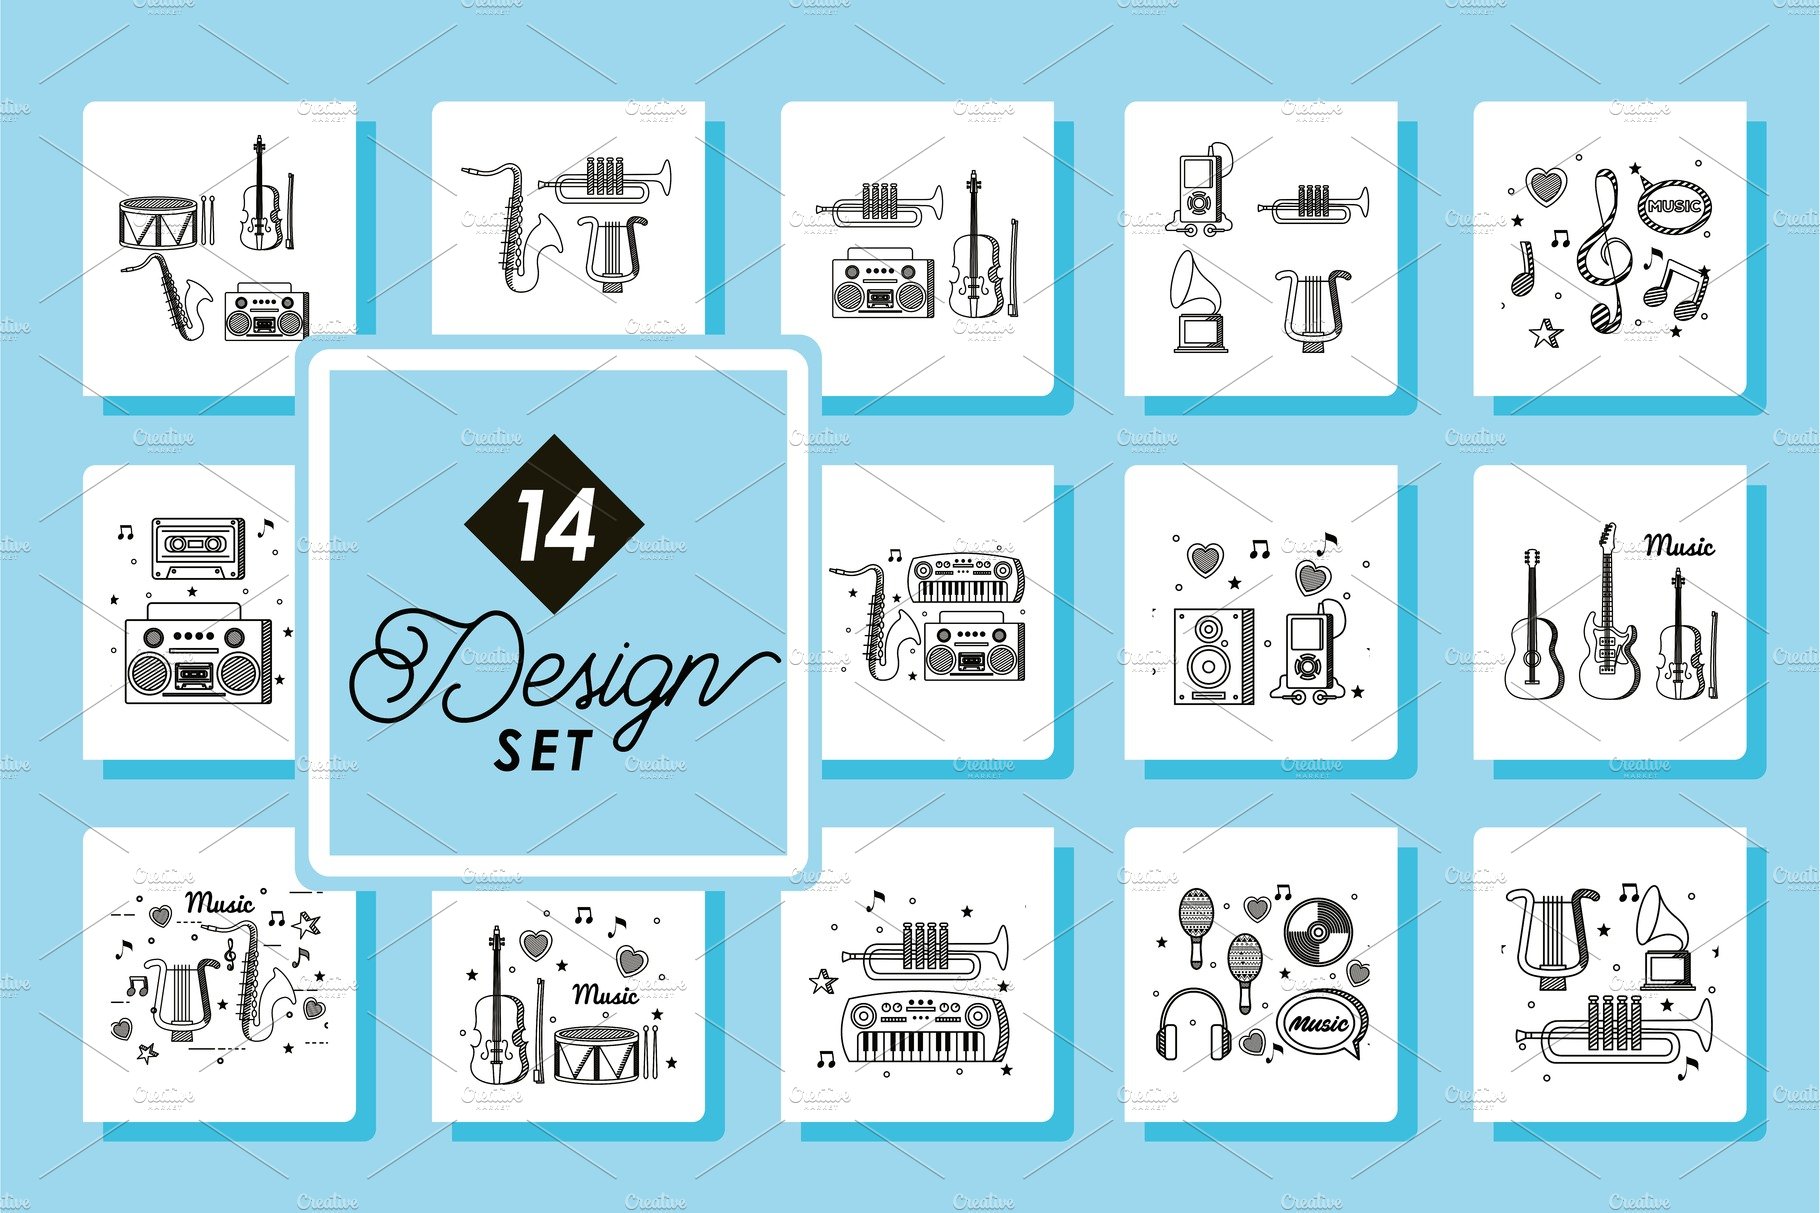 set fourteen designs of music cover image.